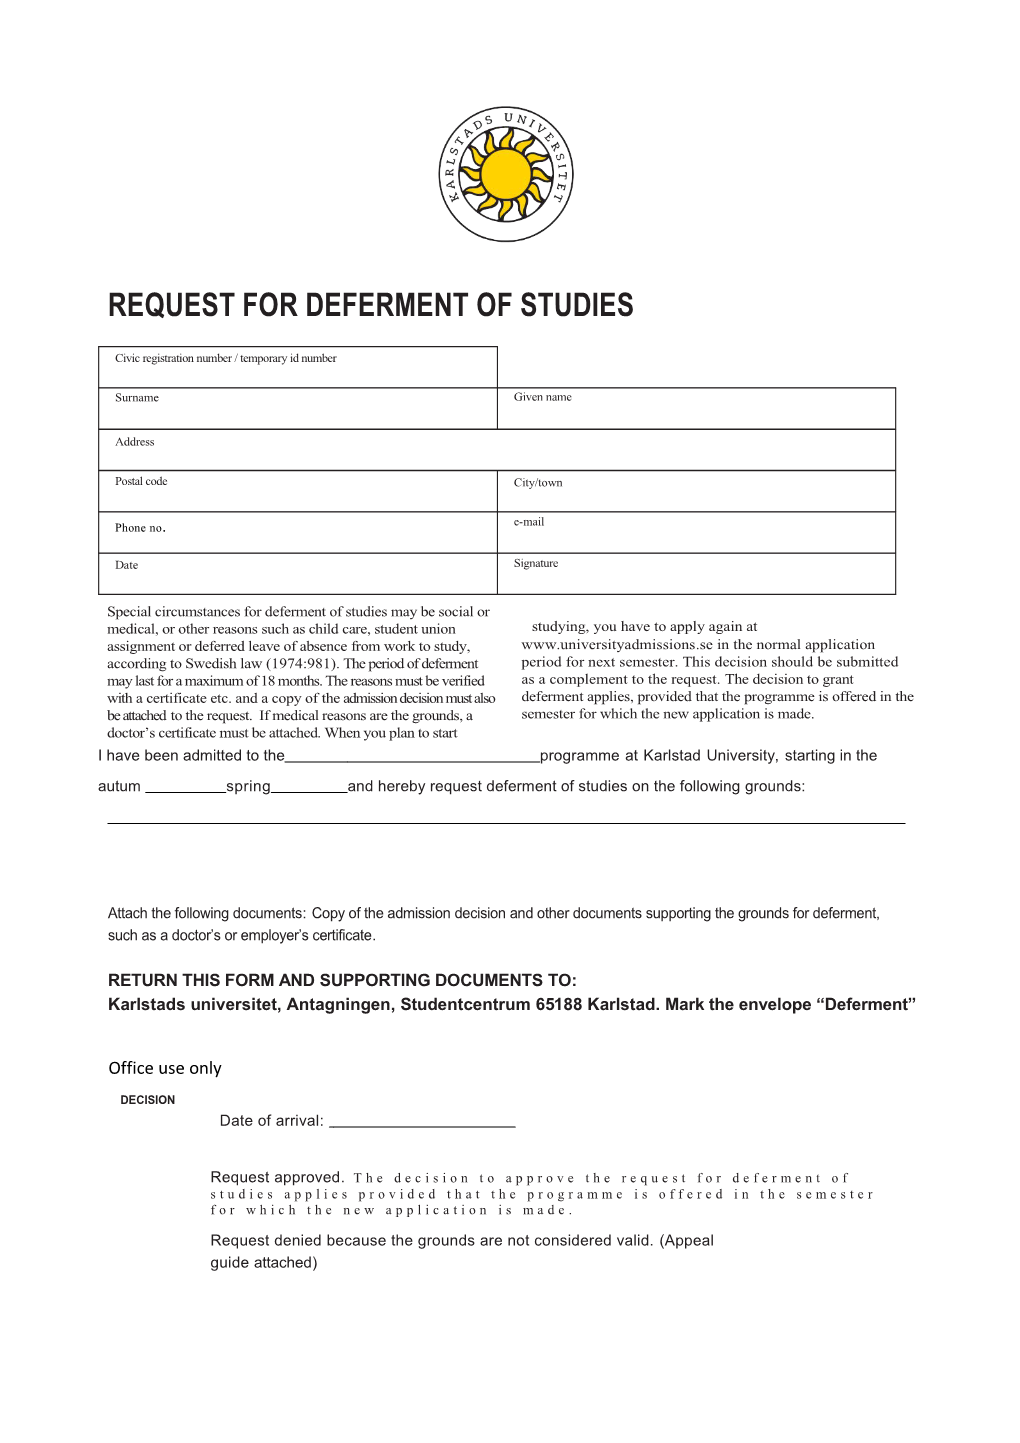 Request for Deferment of Studies